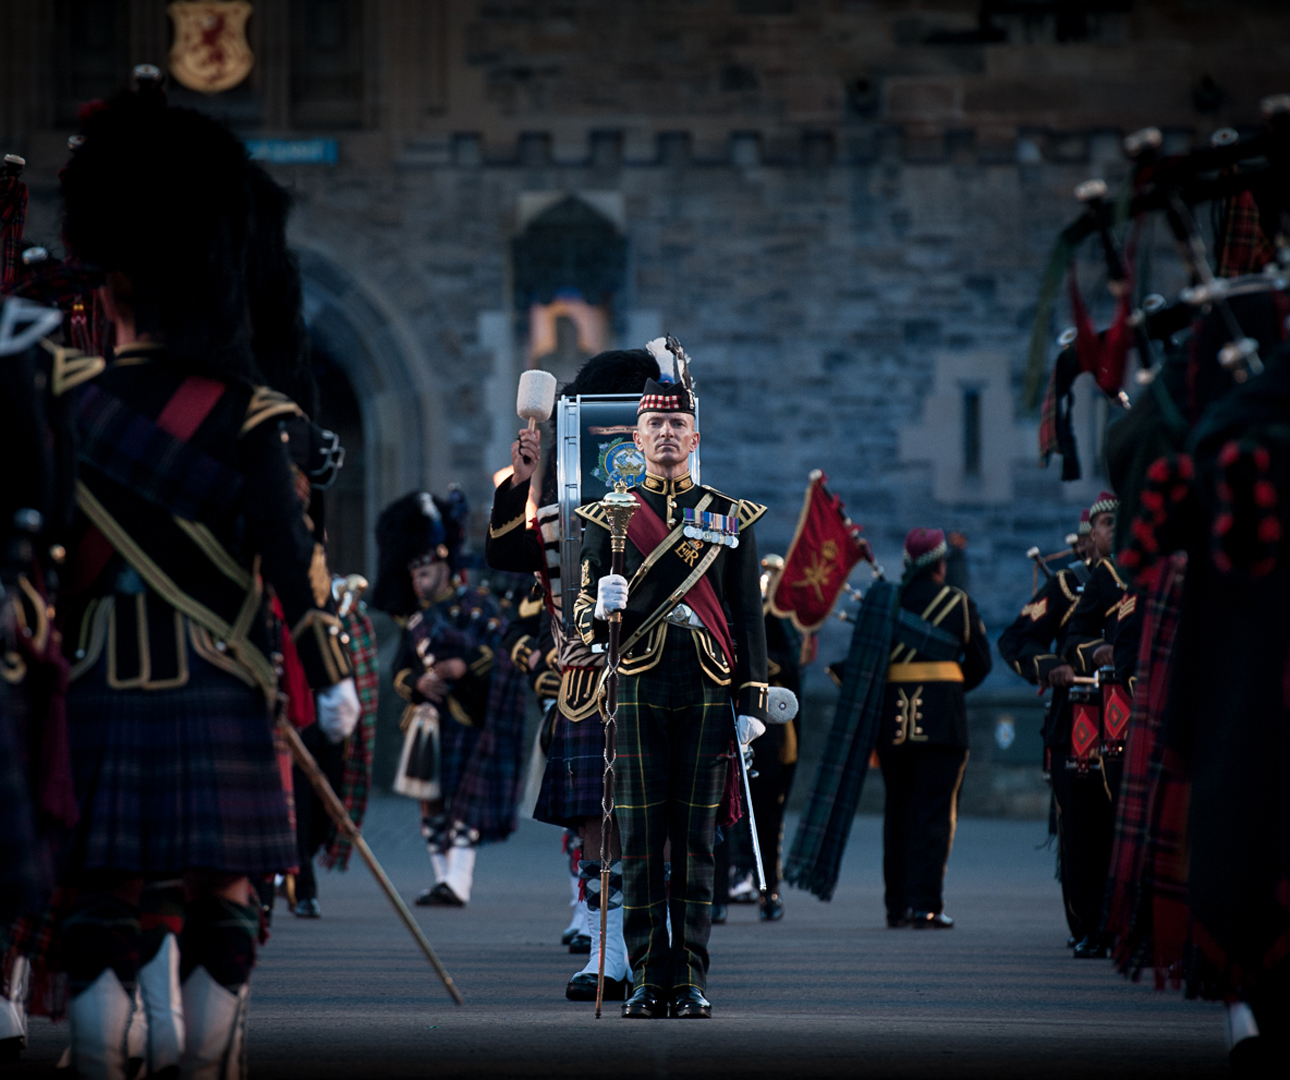 Ten Facts You Never Knew About the Royal Edinburgh Military Tattoo